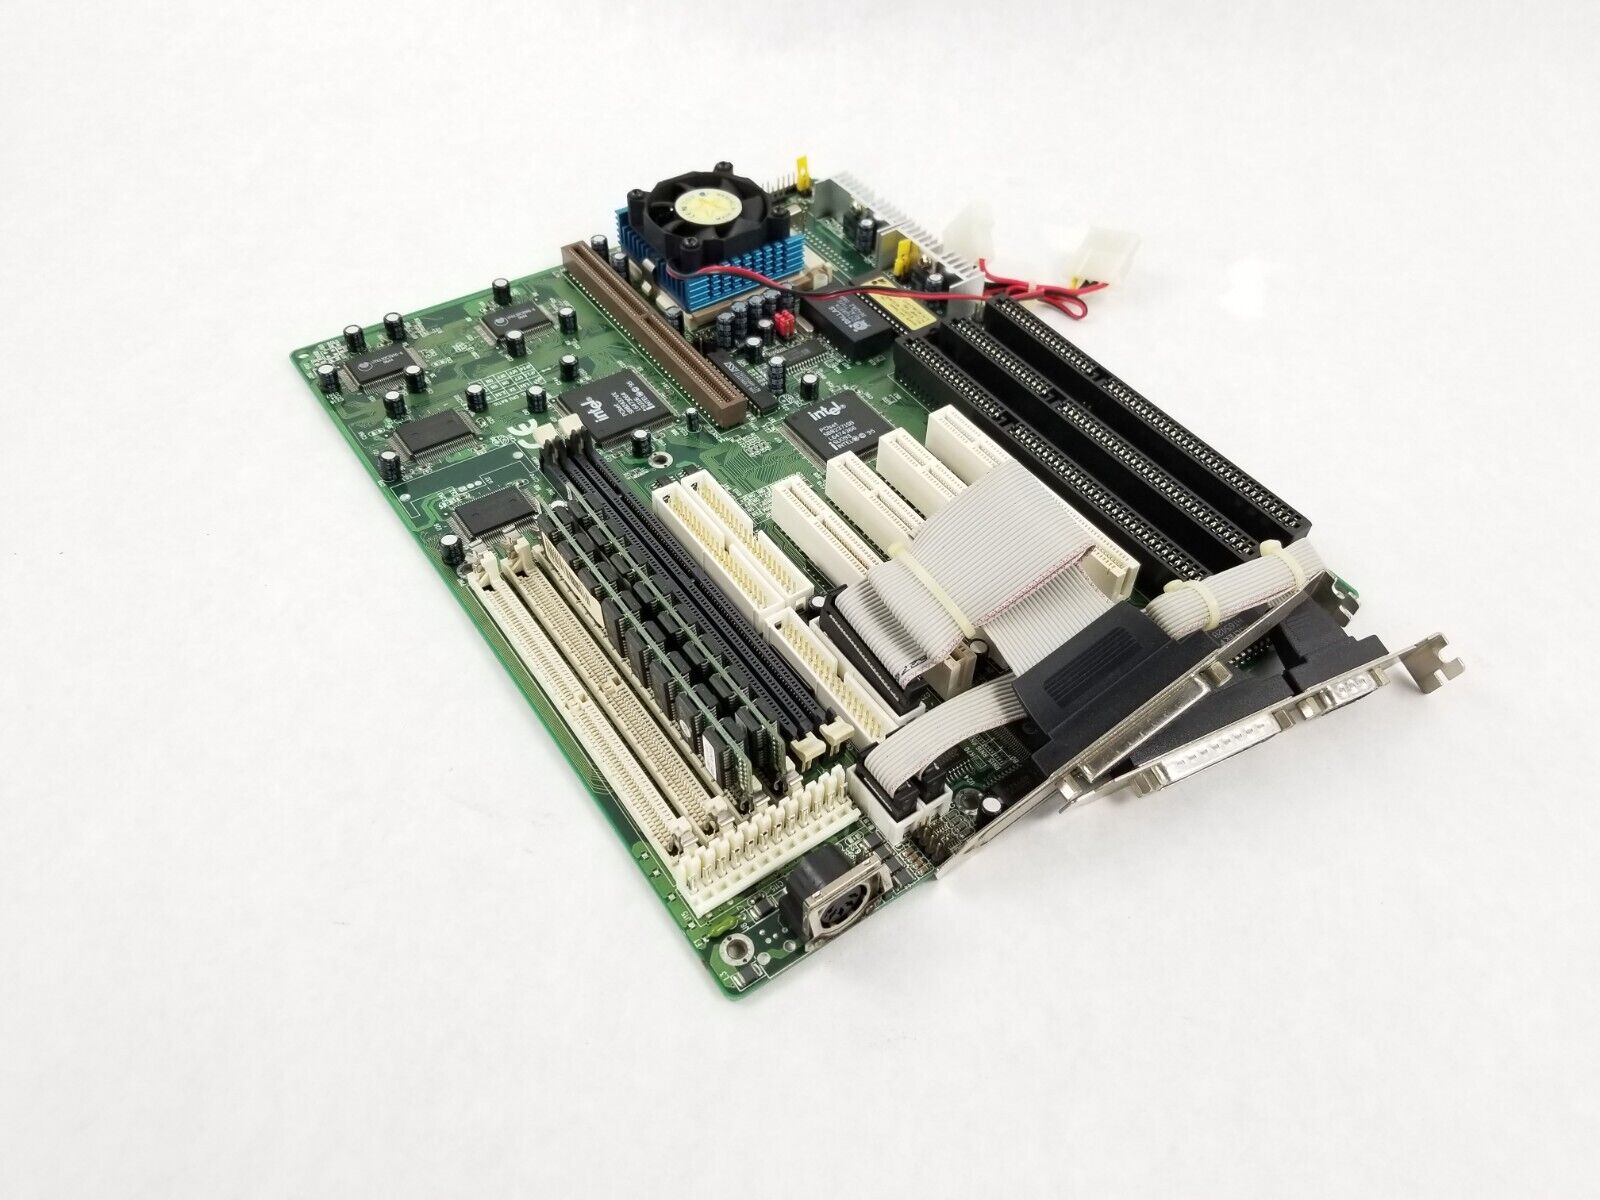 Shuttle HOT-577 Motherboard Pentium 166MHZ 64MB RAM Bad DALLAS Time Chip